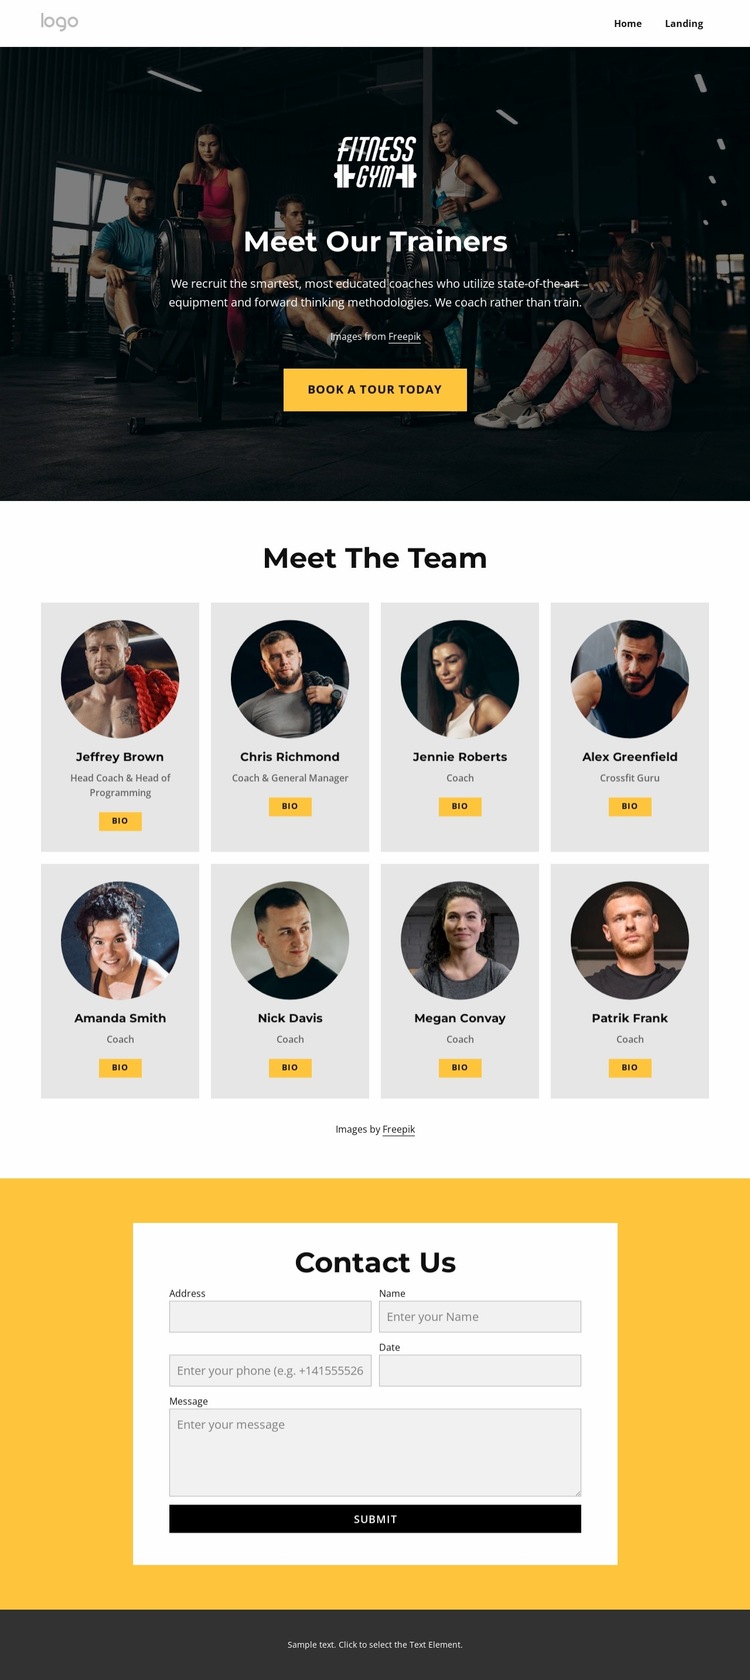 Meet our trainers Website Builder Templates